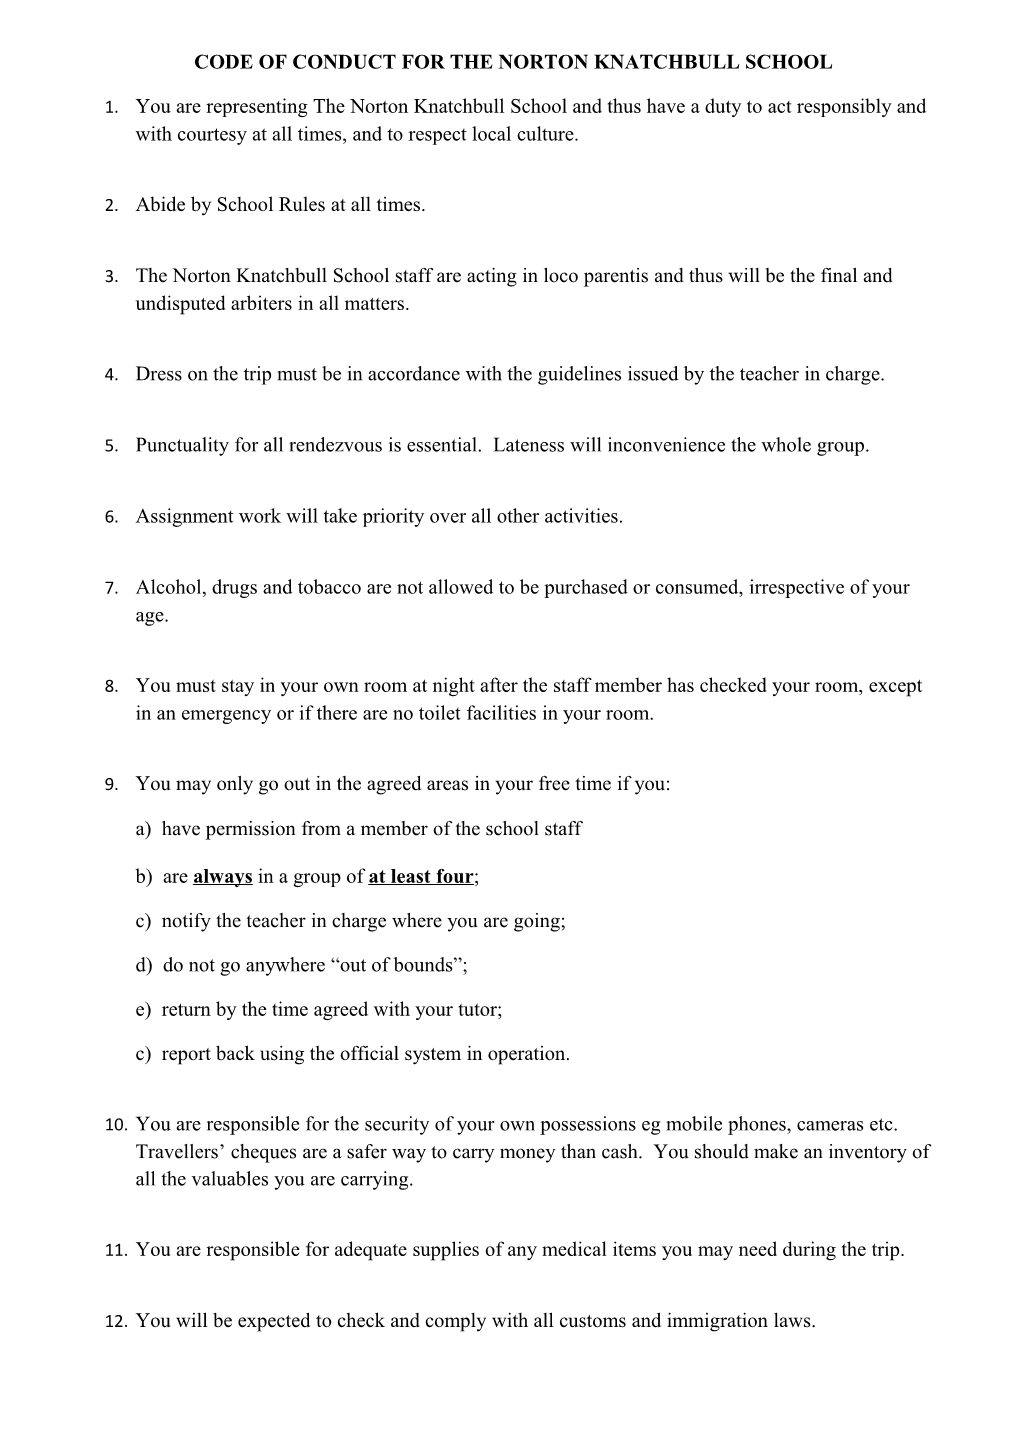 Code of Conduct for the Norton Knatchbull School